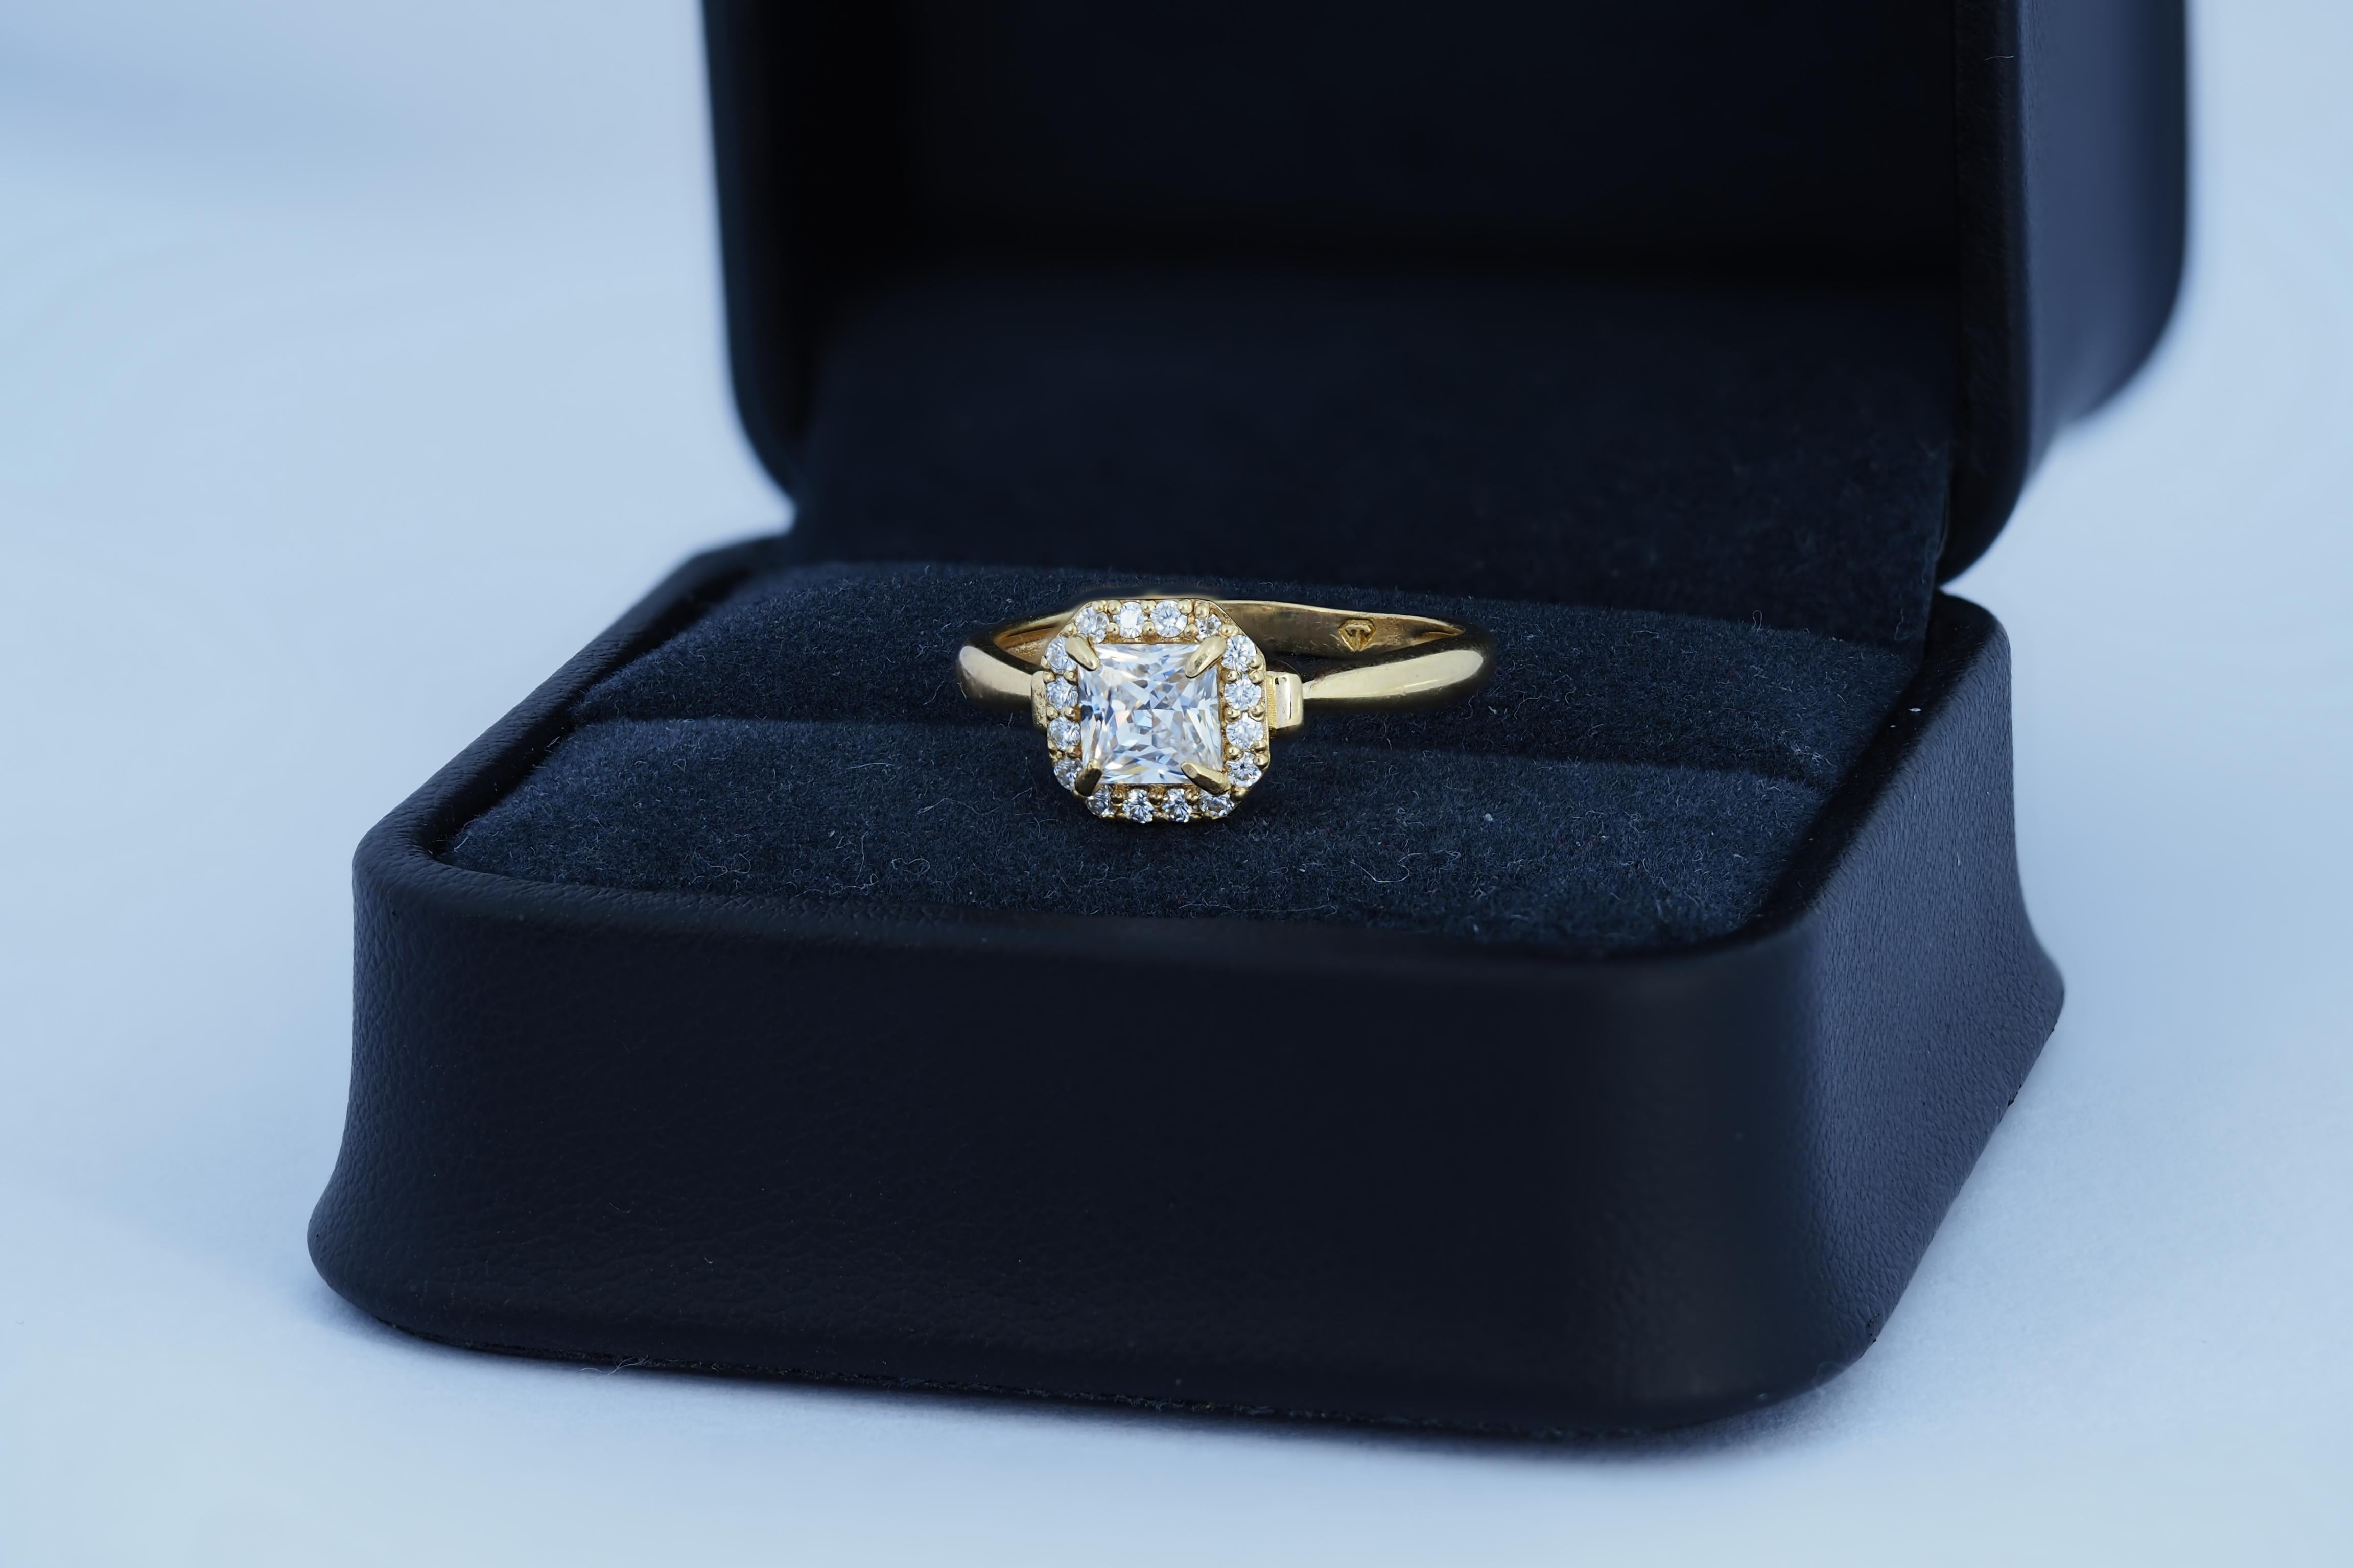 For Sale:  1 ct Princess cut moissanite 14k gold ring.  6